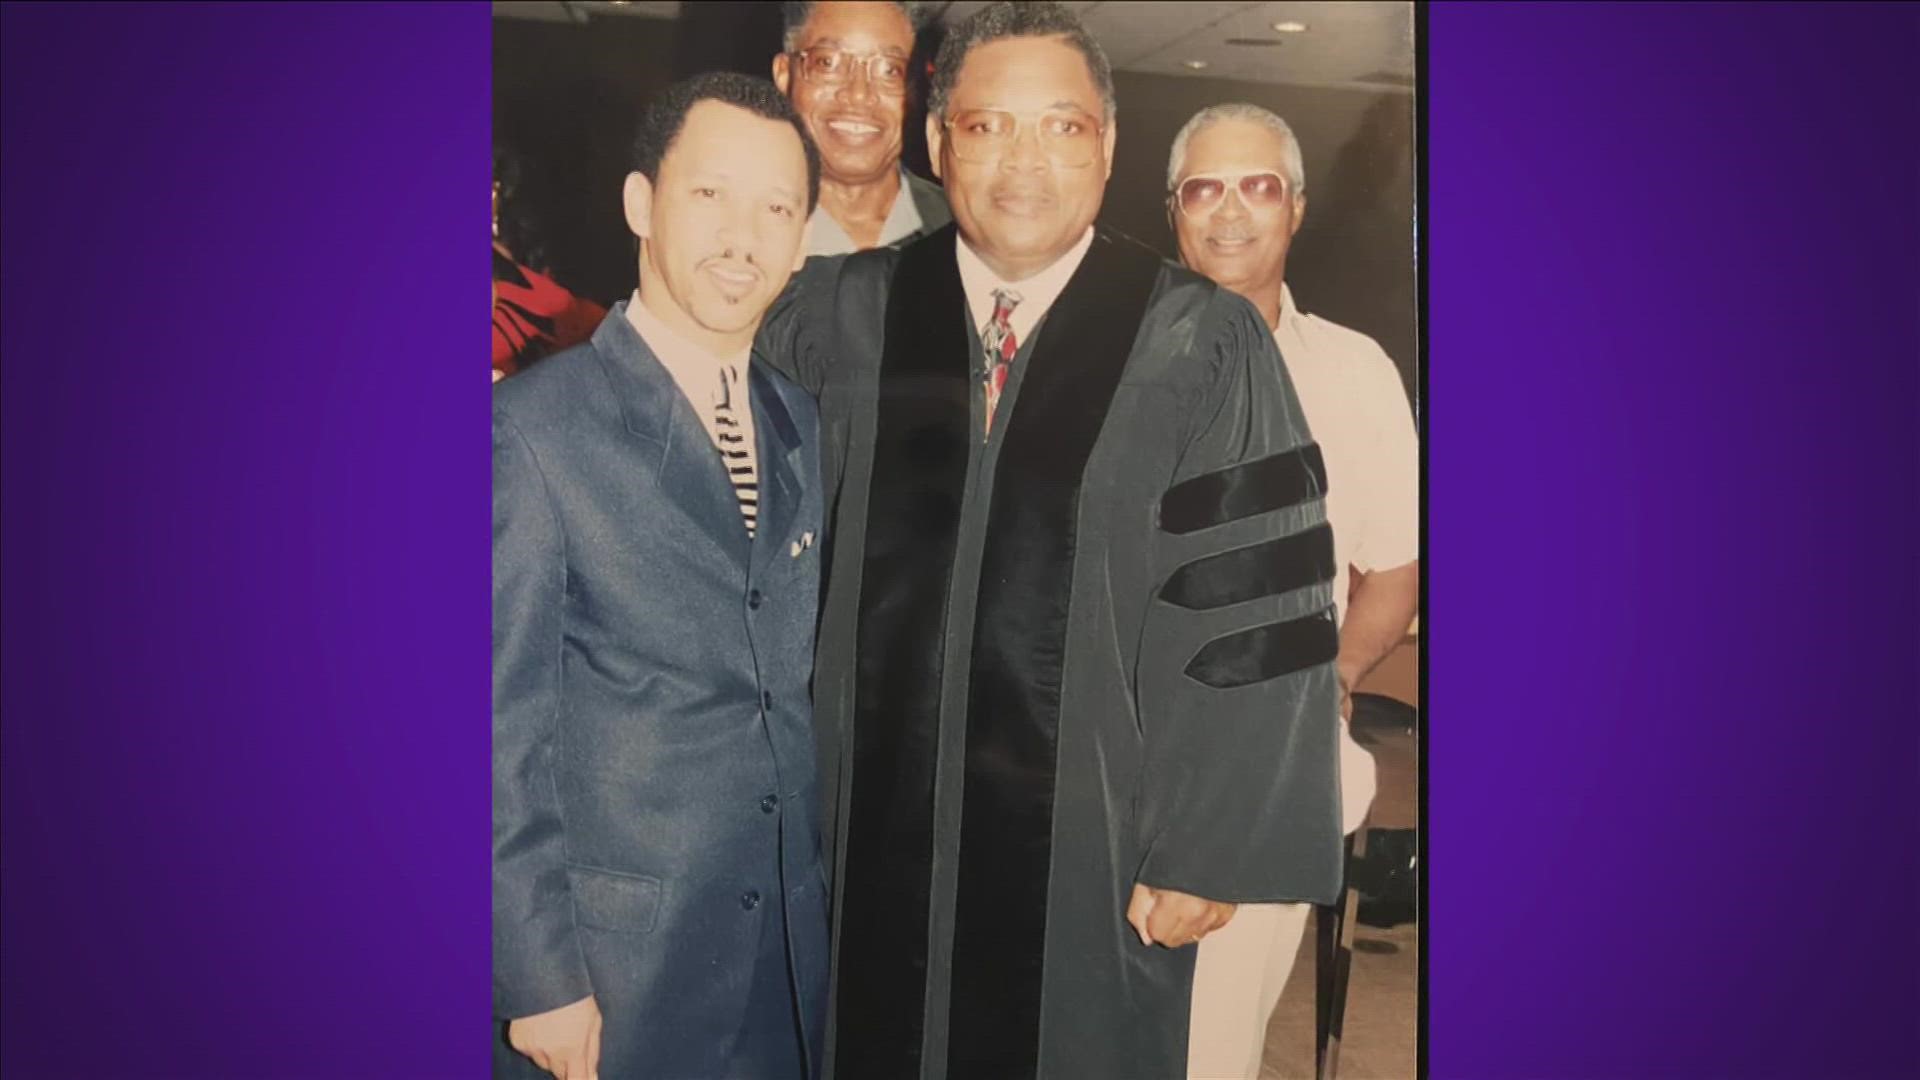 After passing the bar on his first try, a young J.C. McLin was determined to make a difference in law and in life.